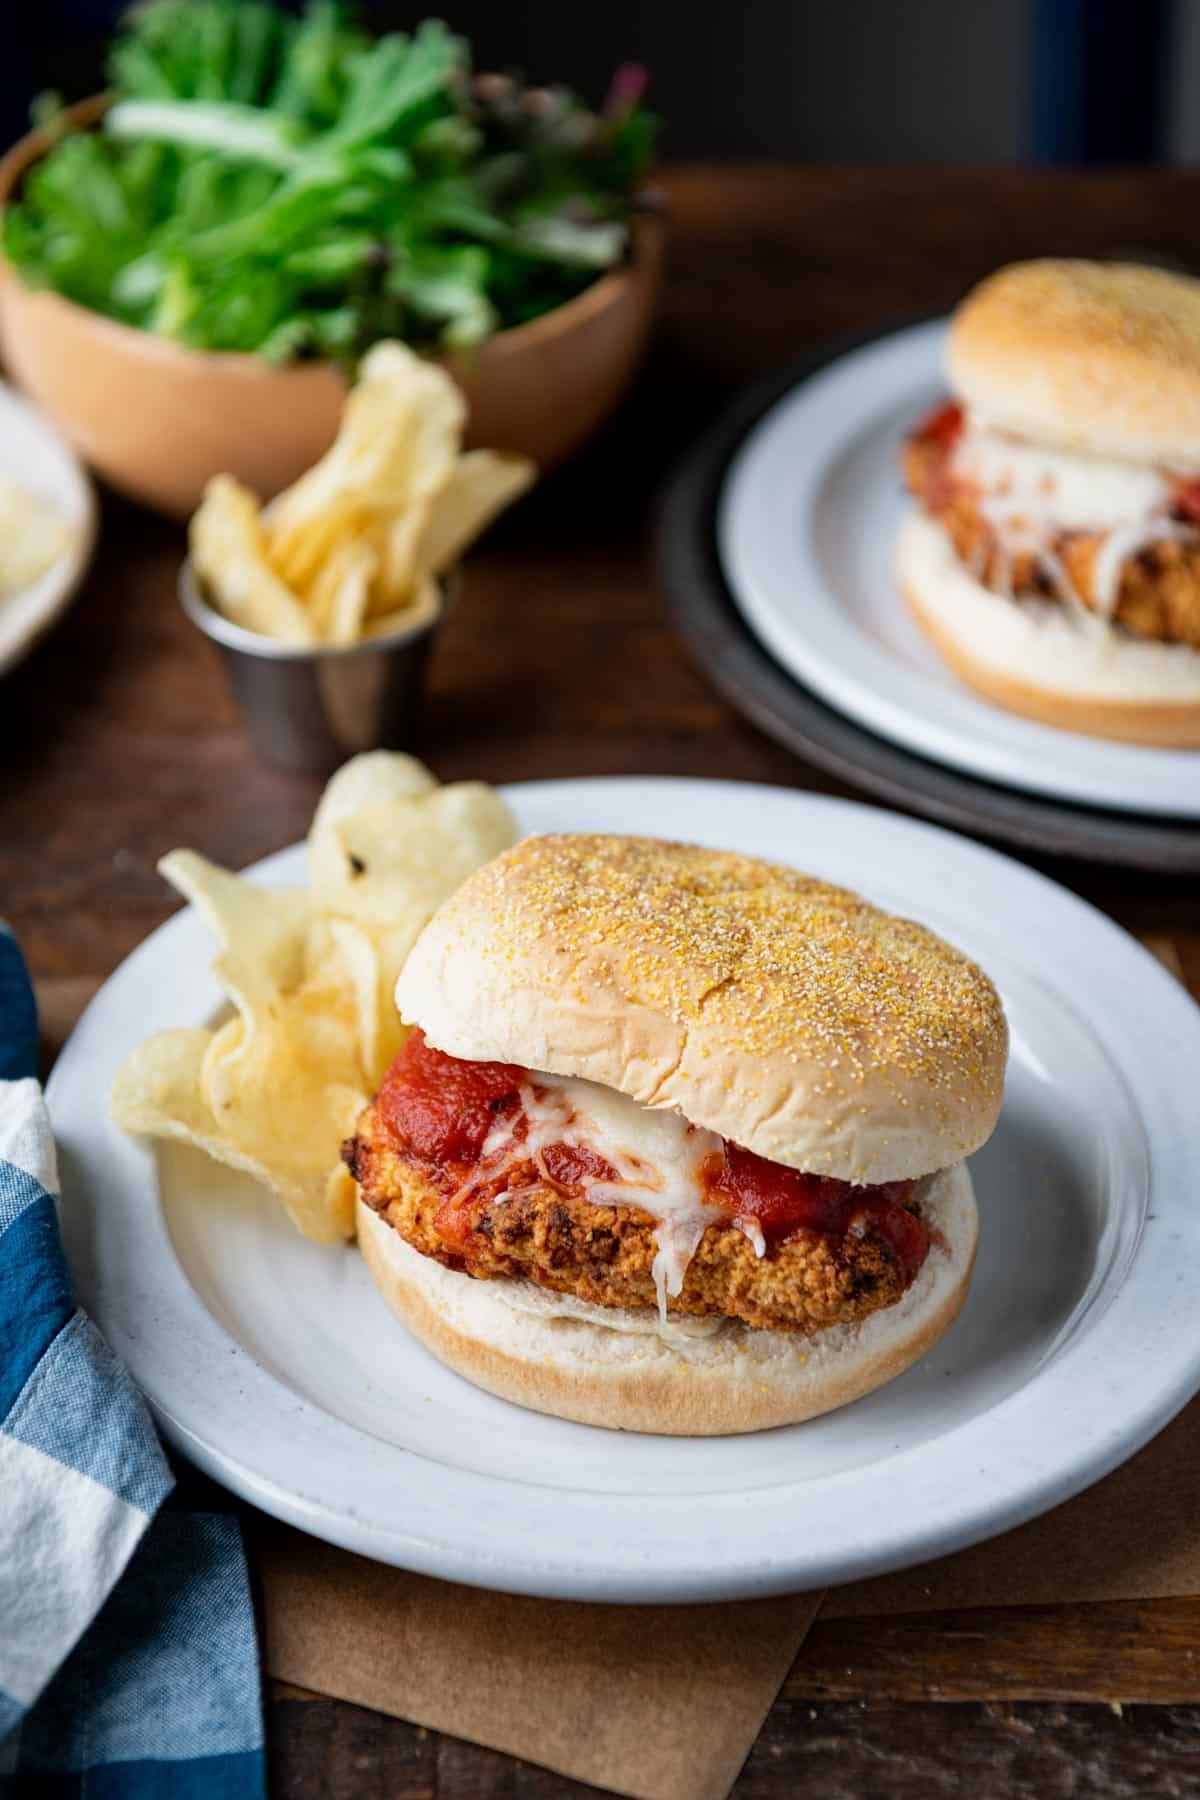 Two chicken parm sandwiches on white plates on a wooden table.